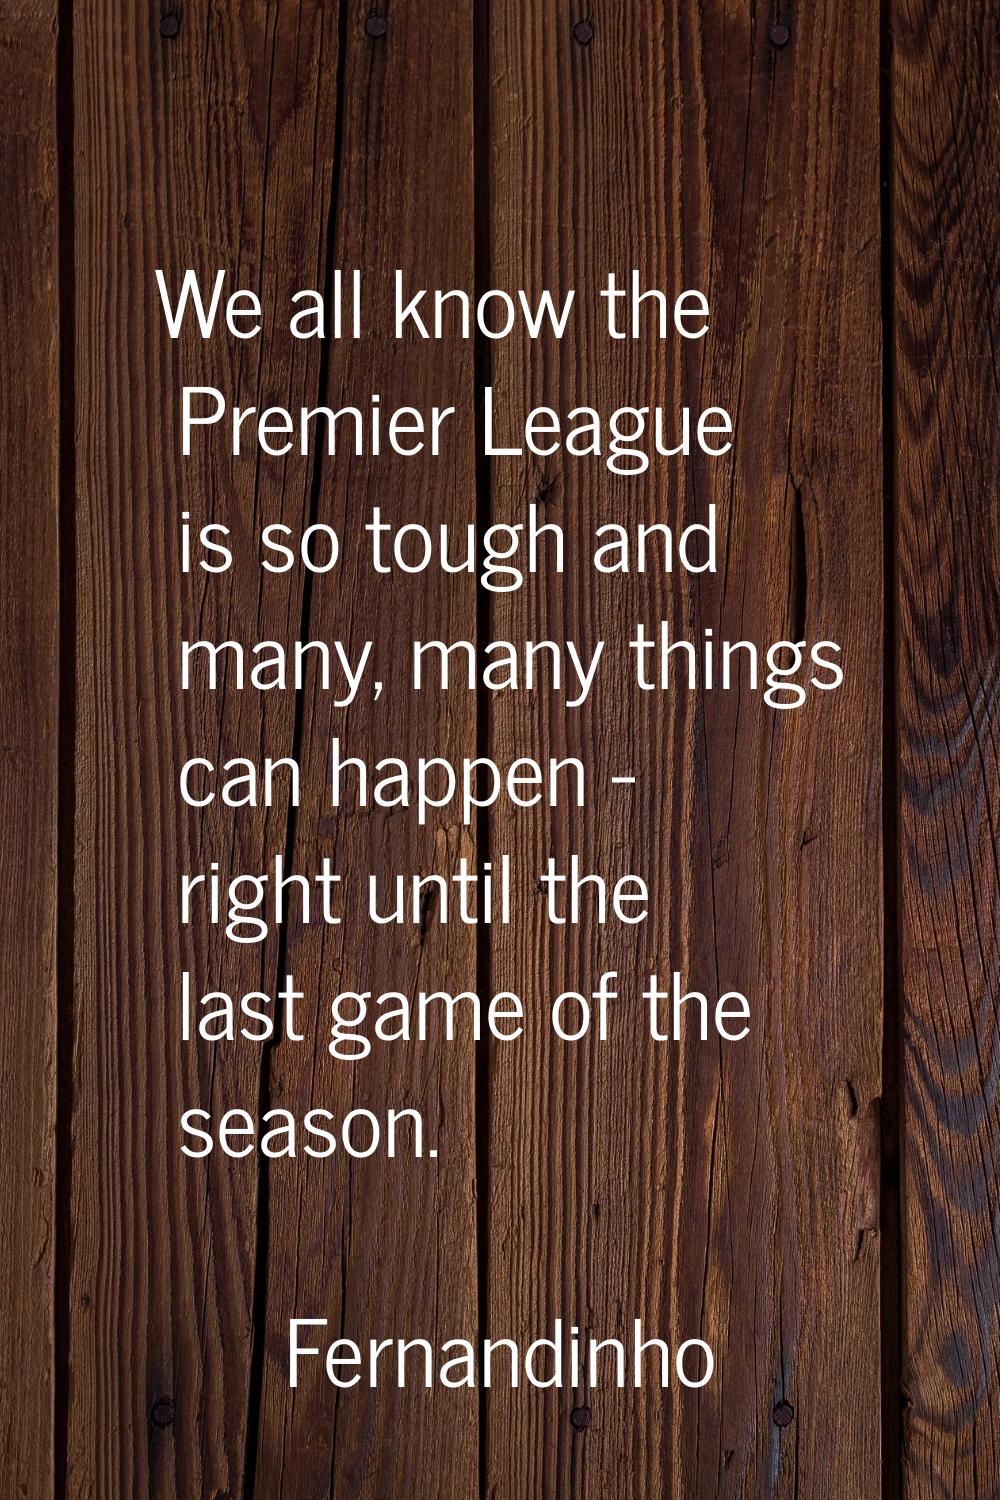 We all know the Premier League is so tough and many, many things can happen - right until the last 